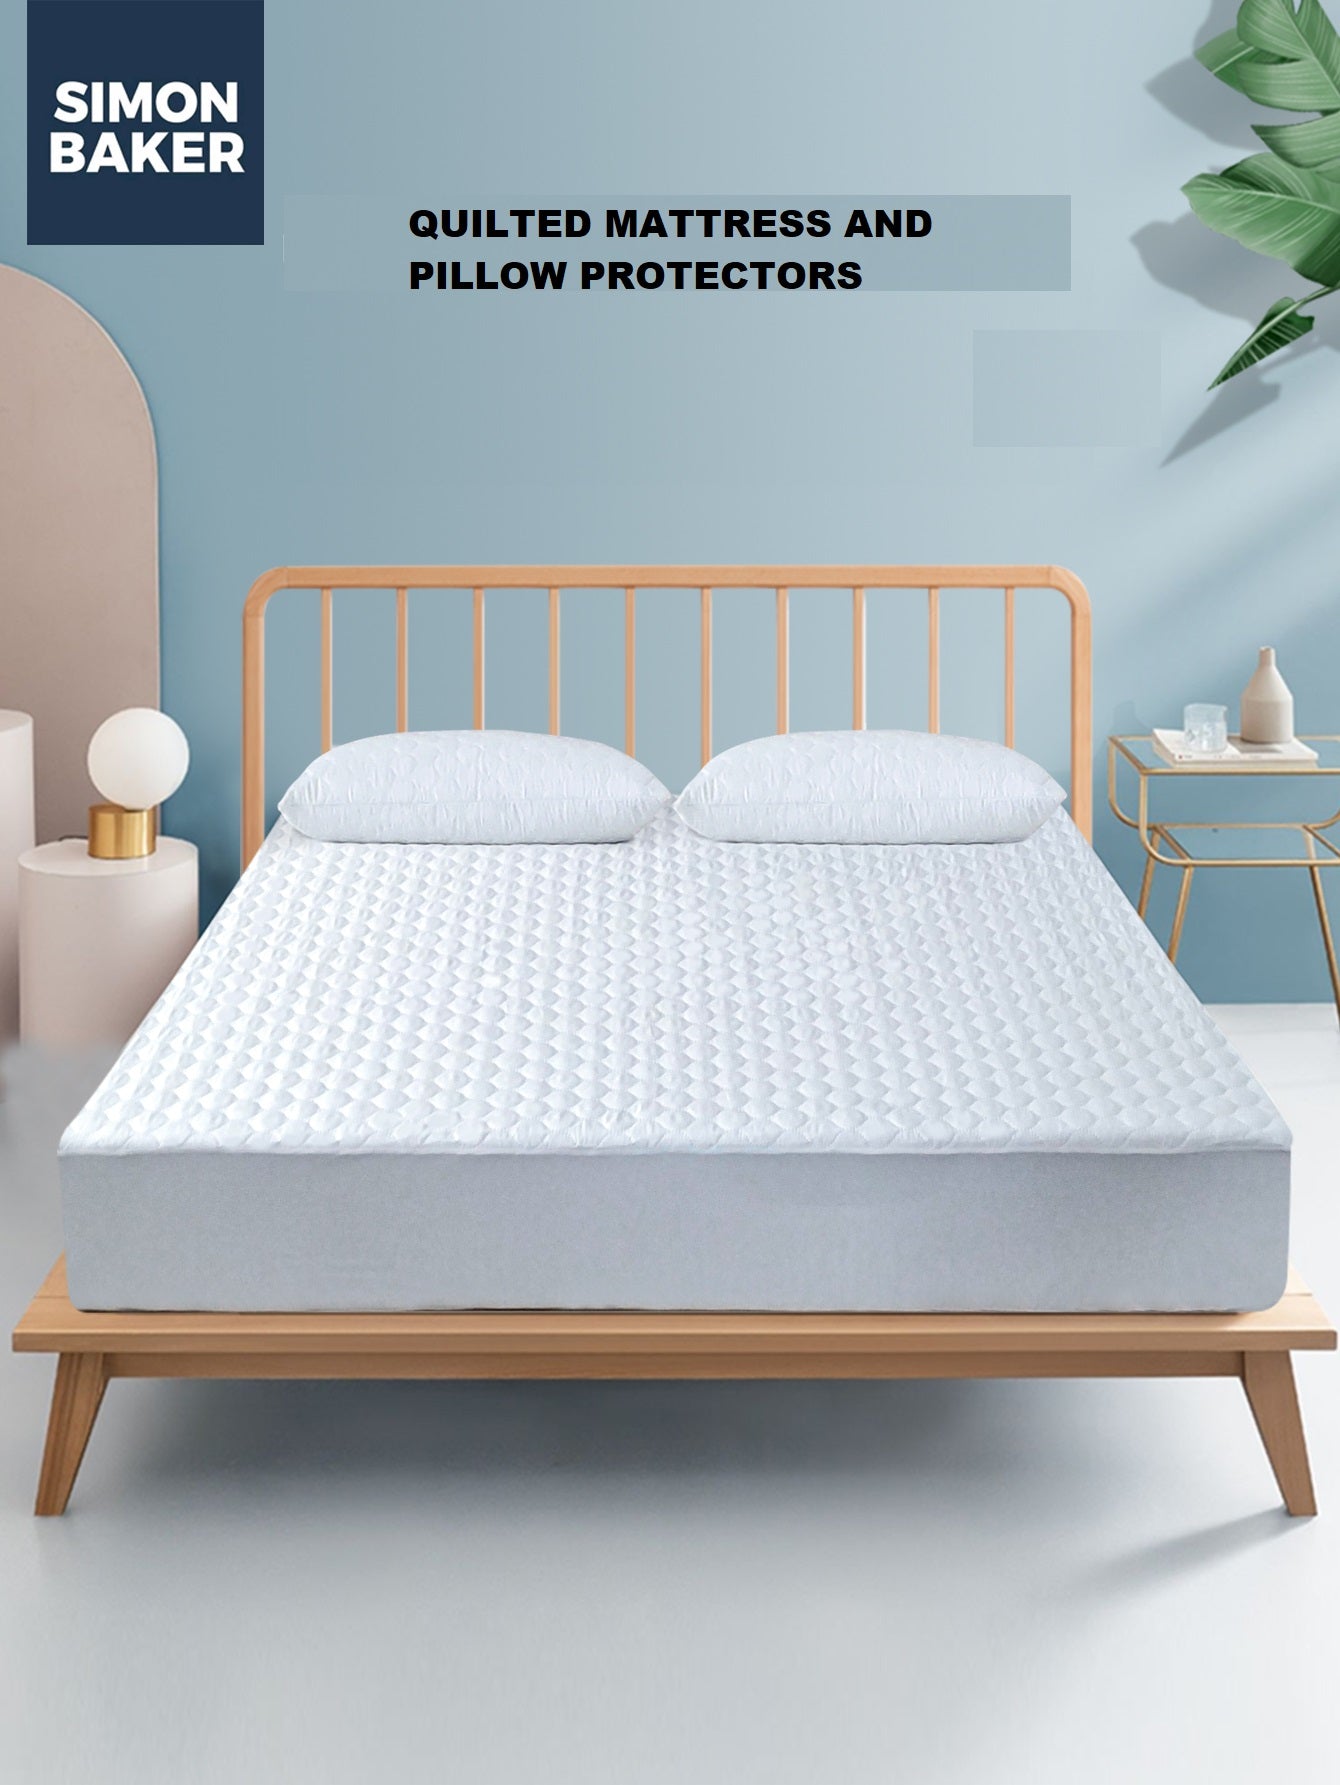 Quilted Mattress & Pillow Protectors